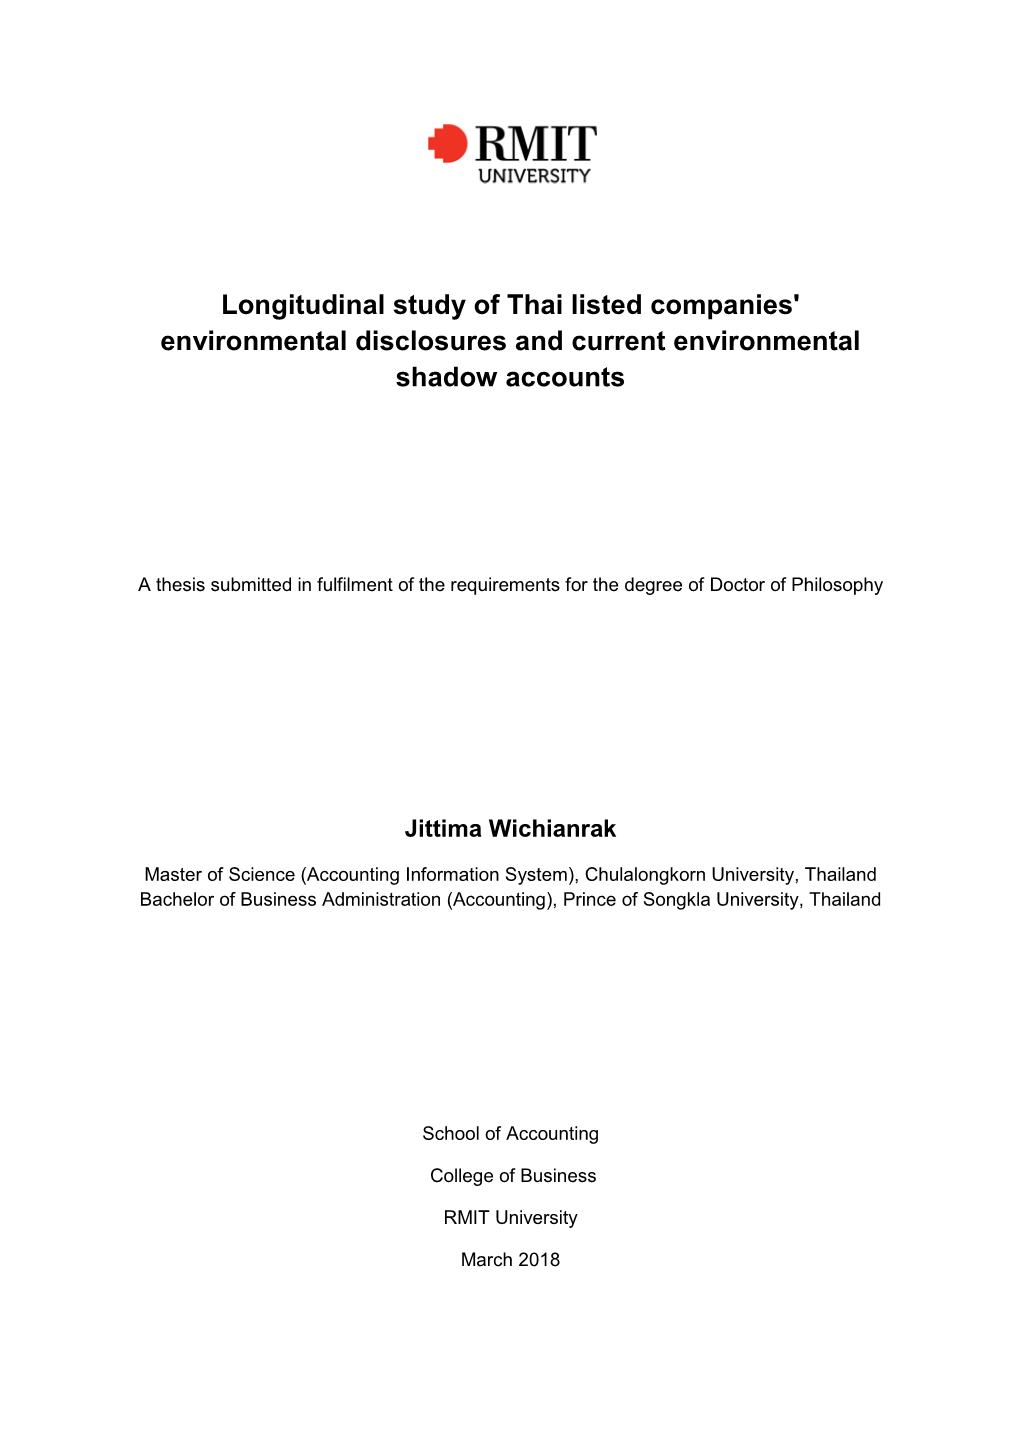 Longitudinal Study of Thai Listed Companies' Environmental Disclosures and Current Environmental Shadow Accounts